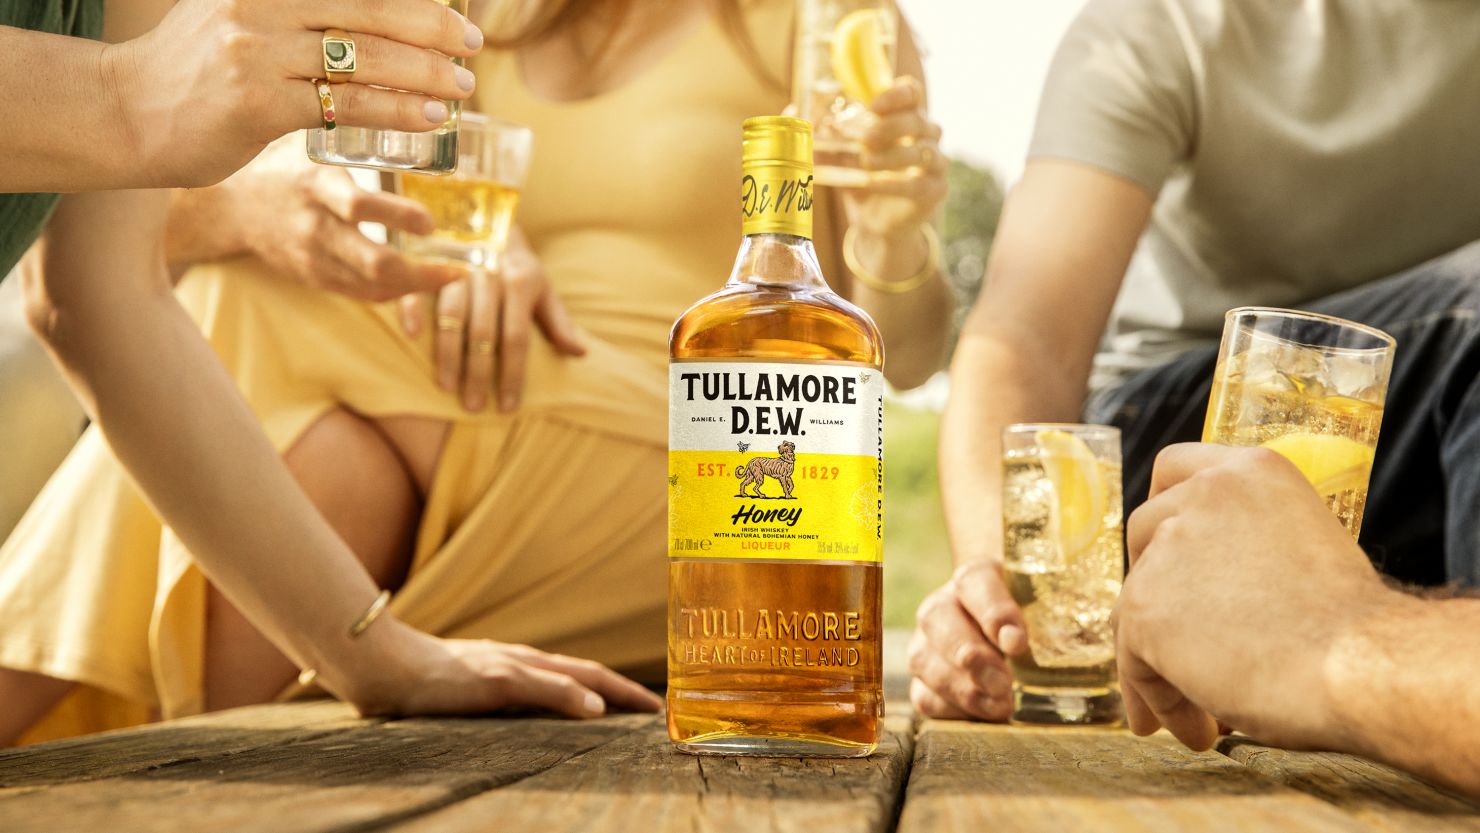 Tullamore D.E.W. launched its first-ever flavor this year.